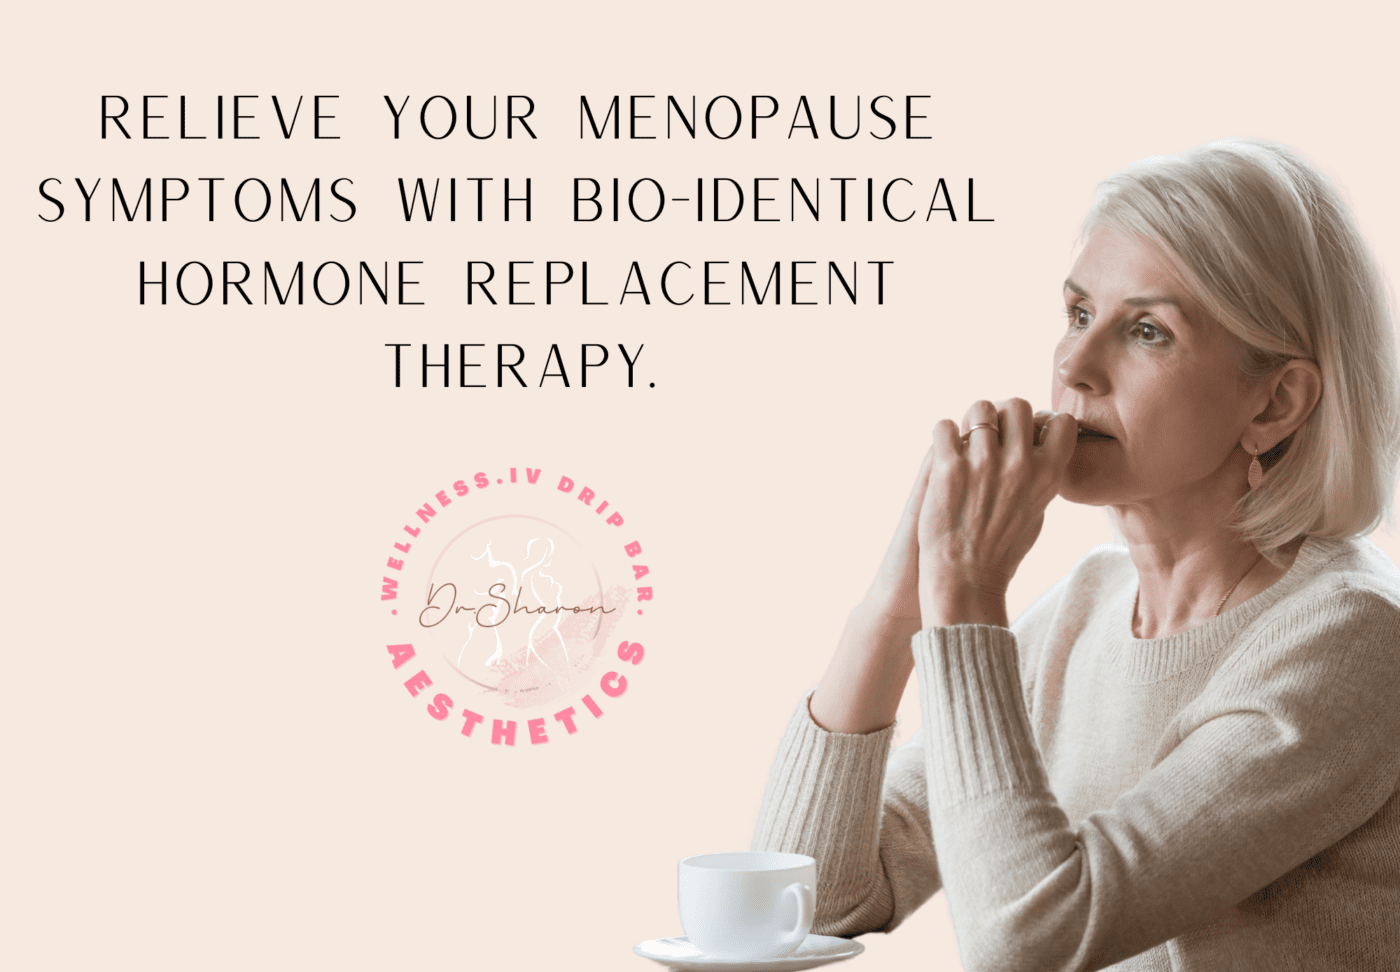 Relieve your menopause symptoms with bio-identical hormone replacement therapy